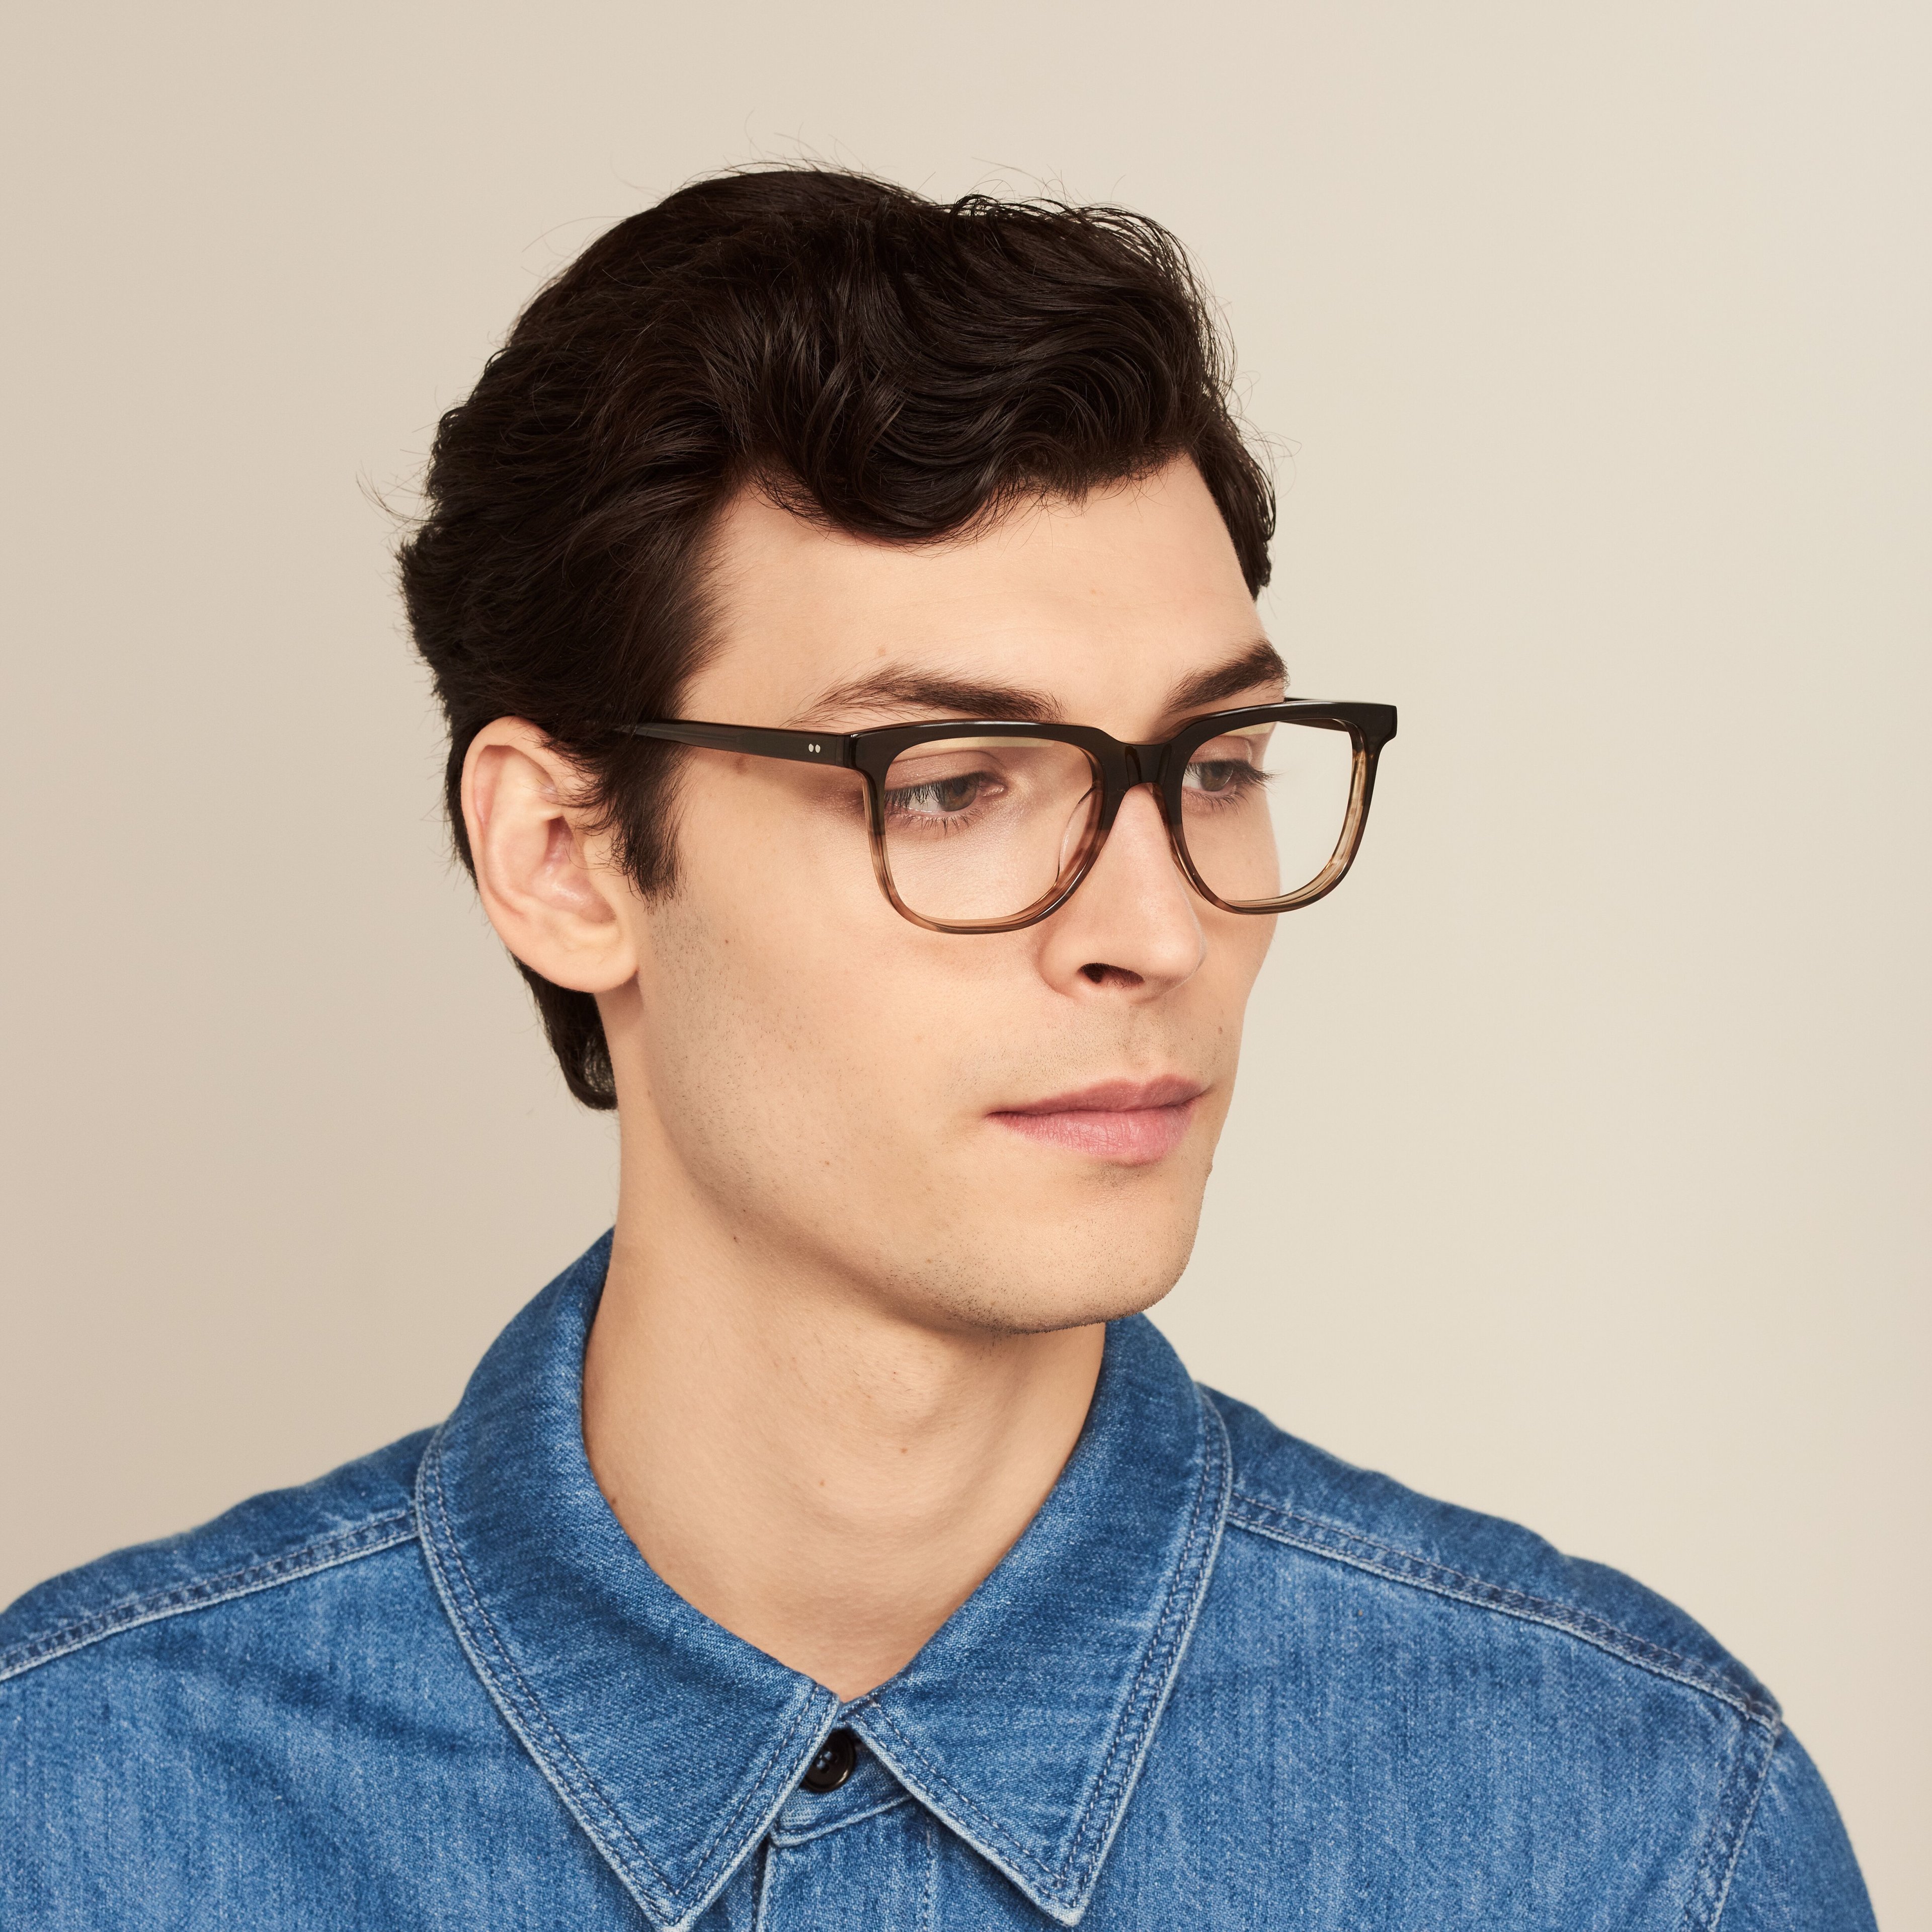 Ace & Tate Glasses | rectangle acetate in Brown, Green